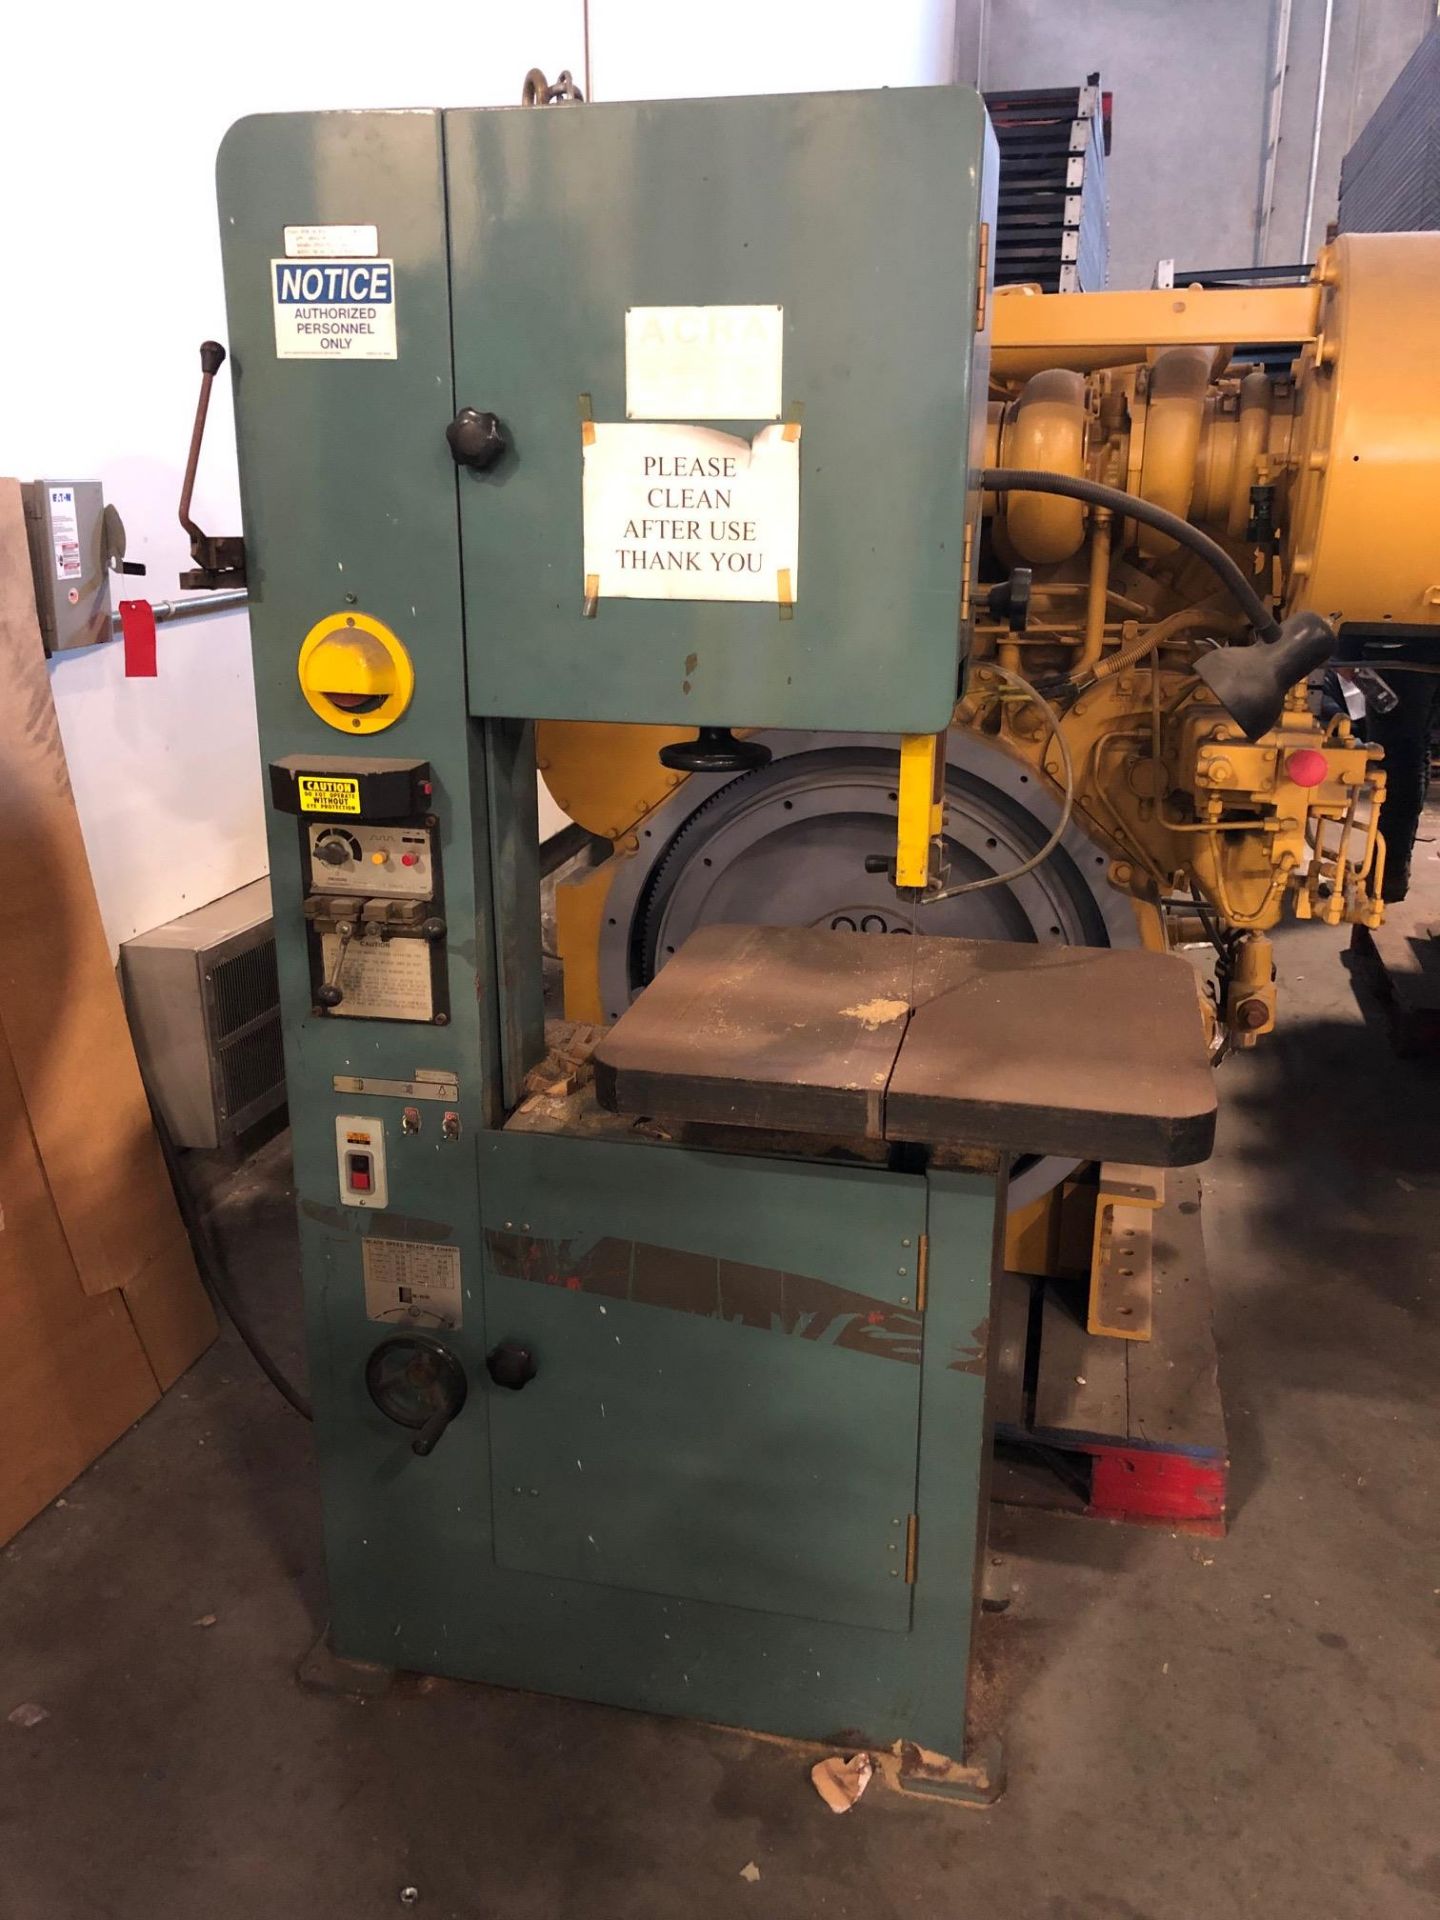 Acra KB-45 Vertical Saw with 12" x 18” Table, Welder, Variable Speeds, sn B451670 (non-running)